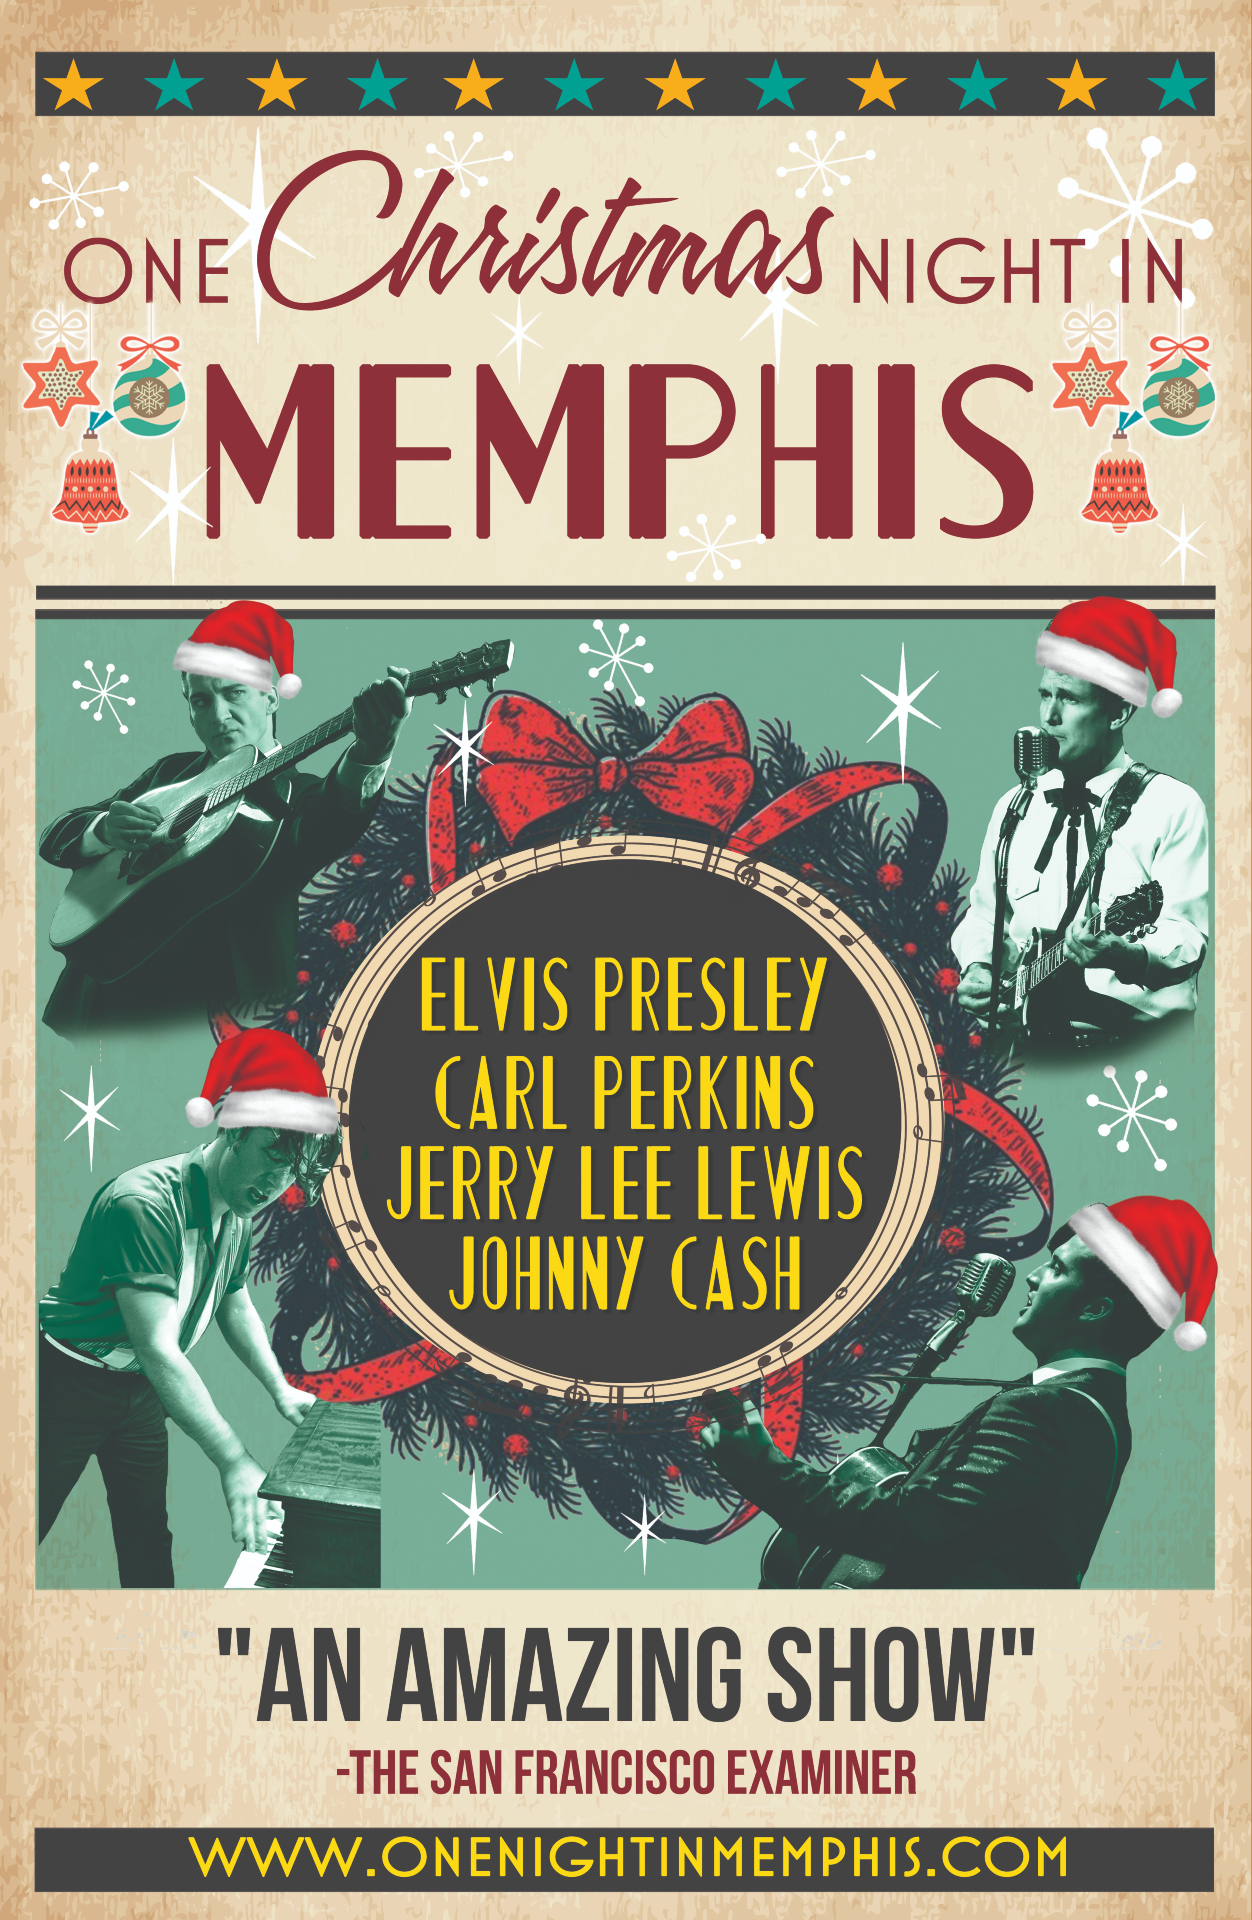 One Christmas Night in Memphis